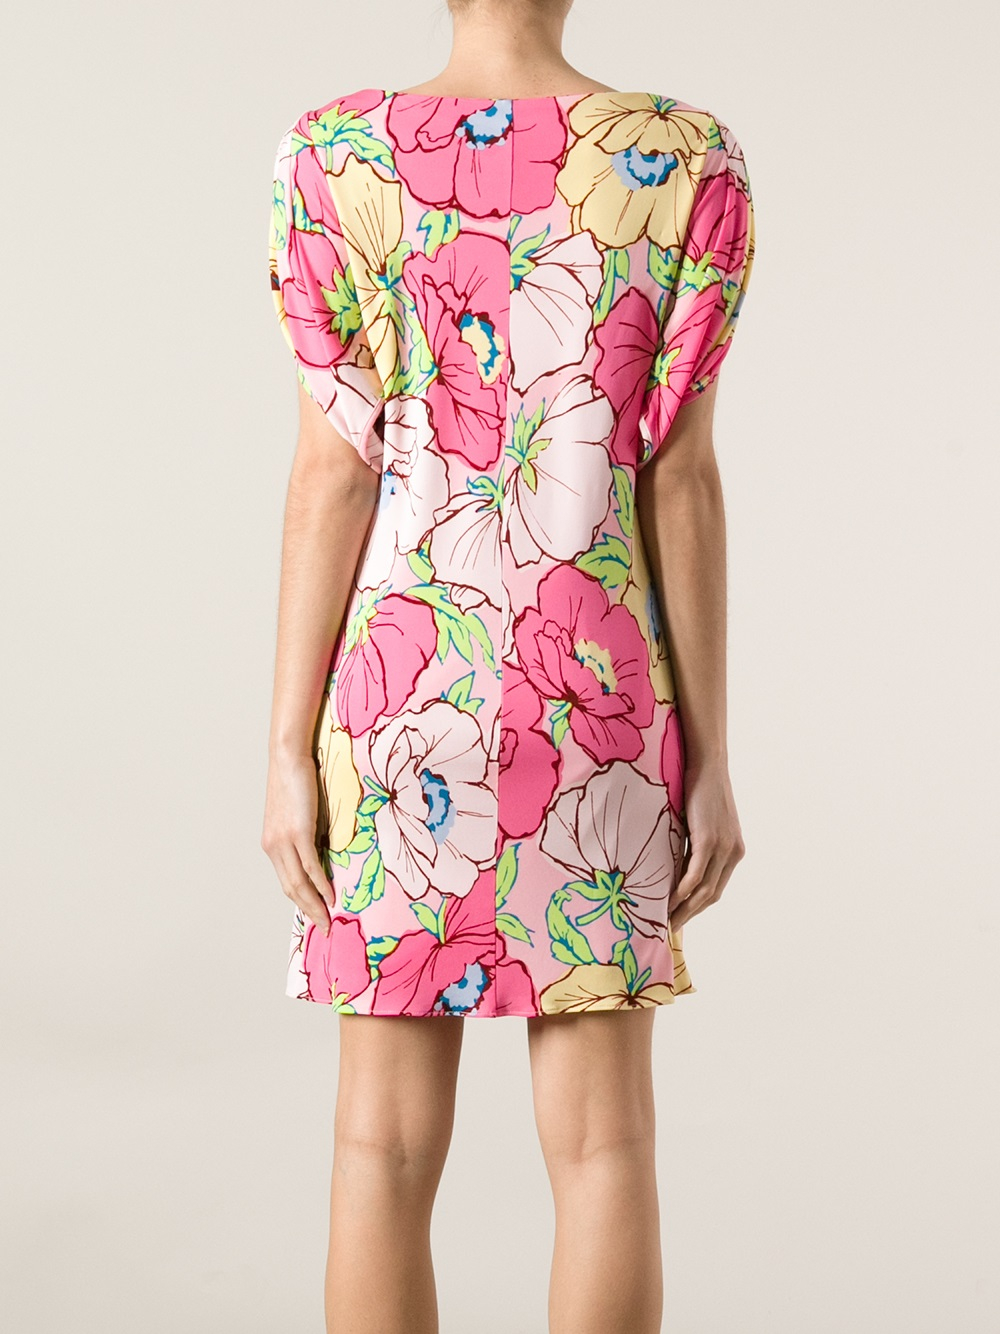 Moschino Floral Print Shift Dress in Pink & Purple (Pink) - Lyst